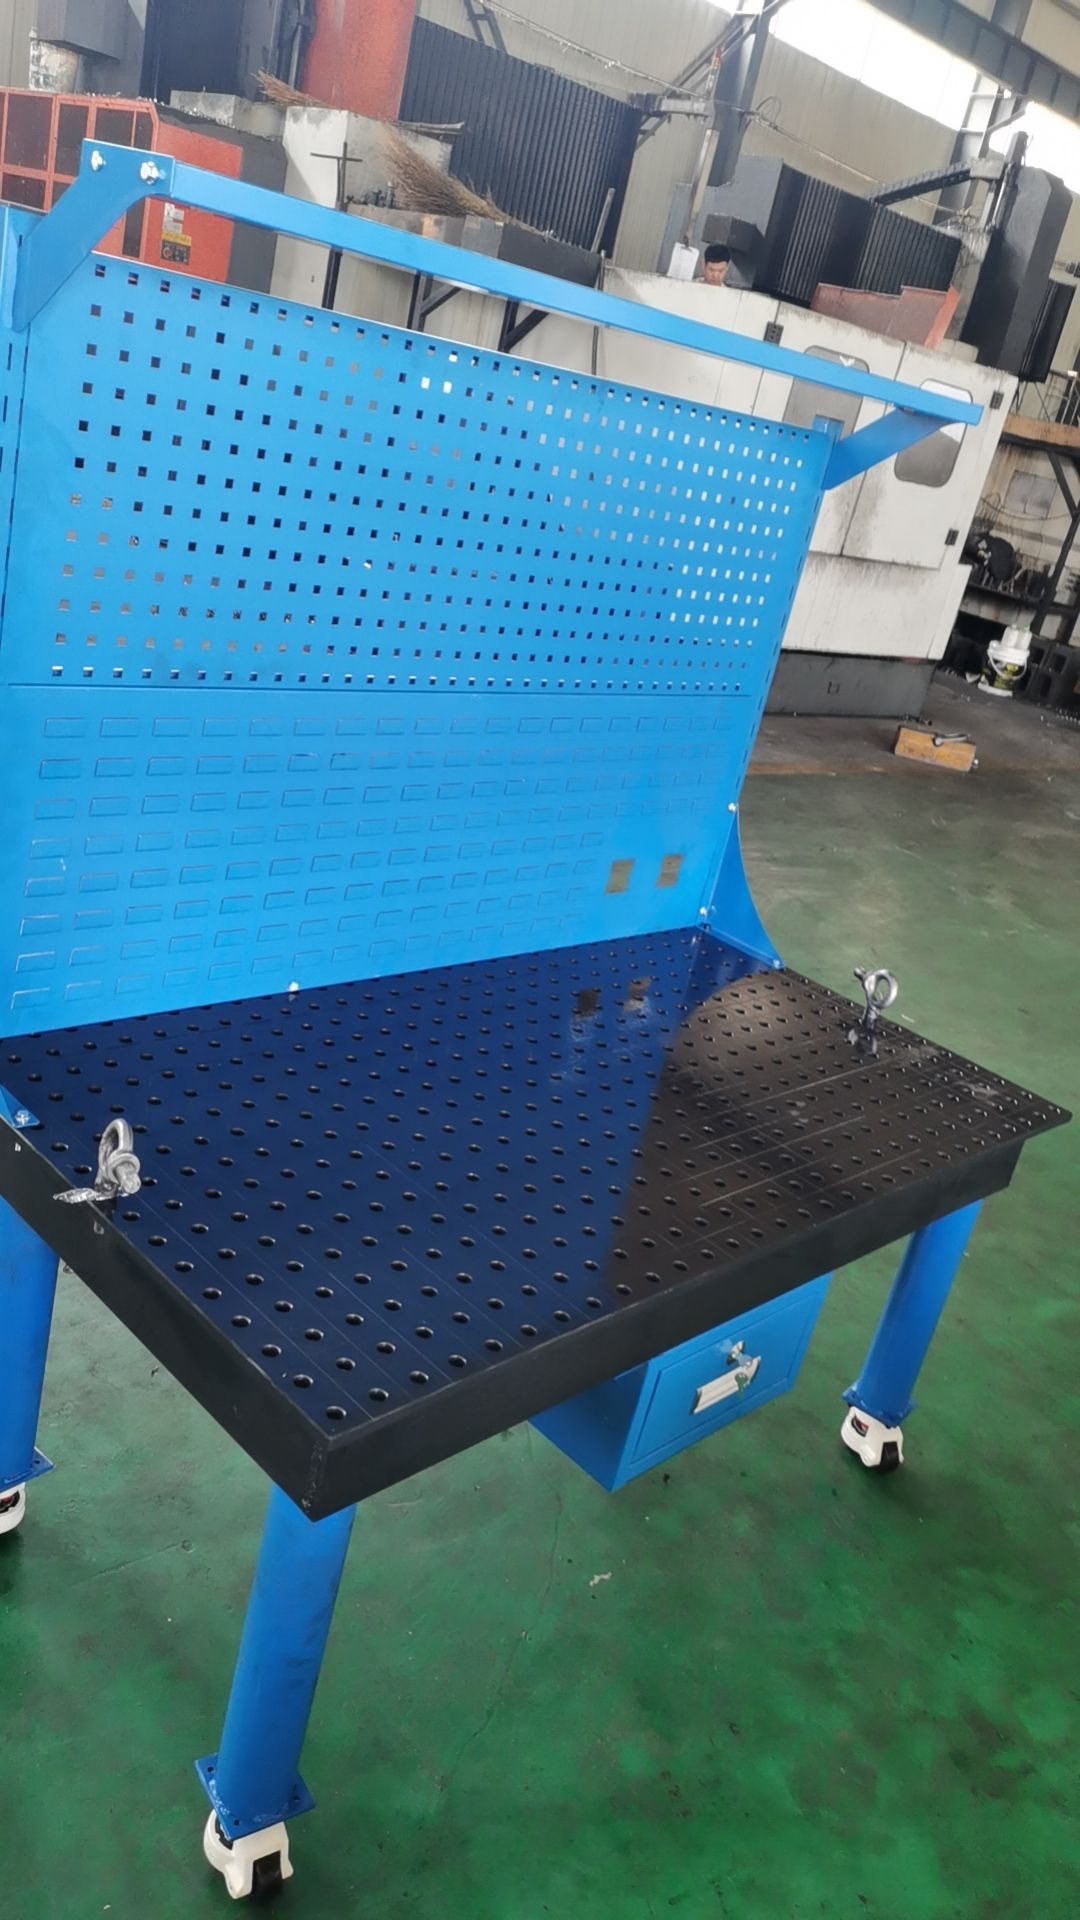 Two-dimensional flexible tooling welding table and fixture